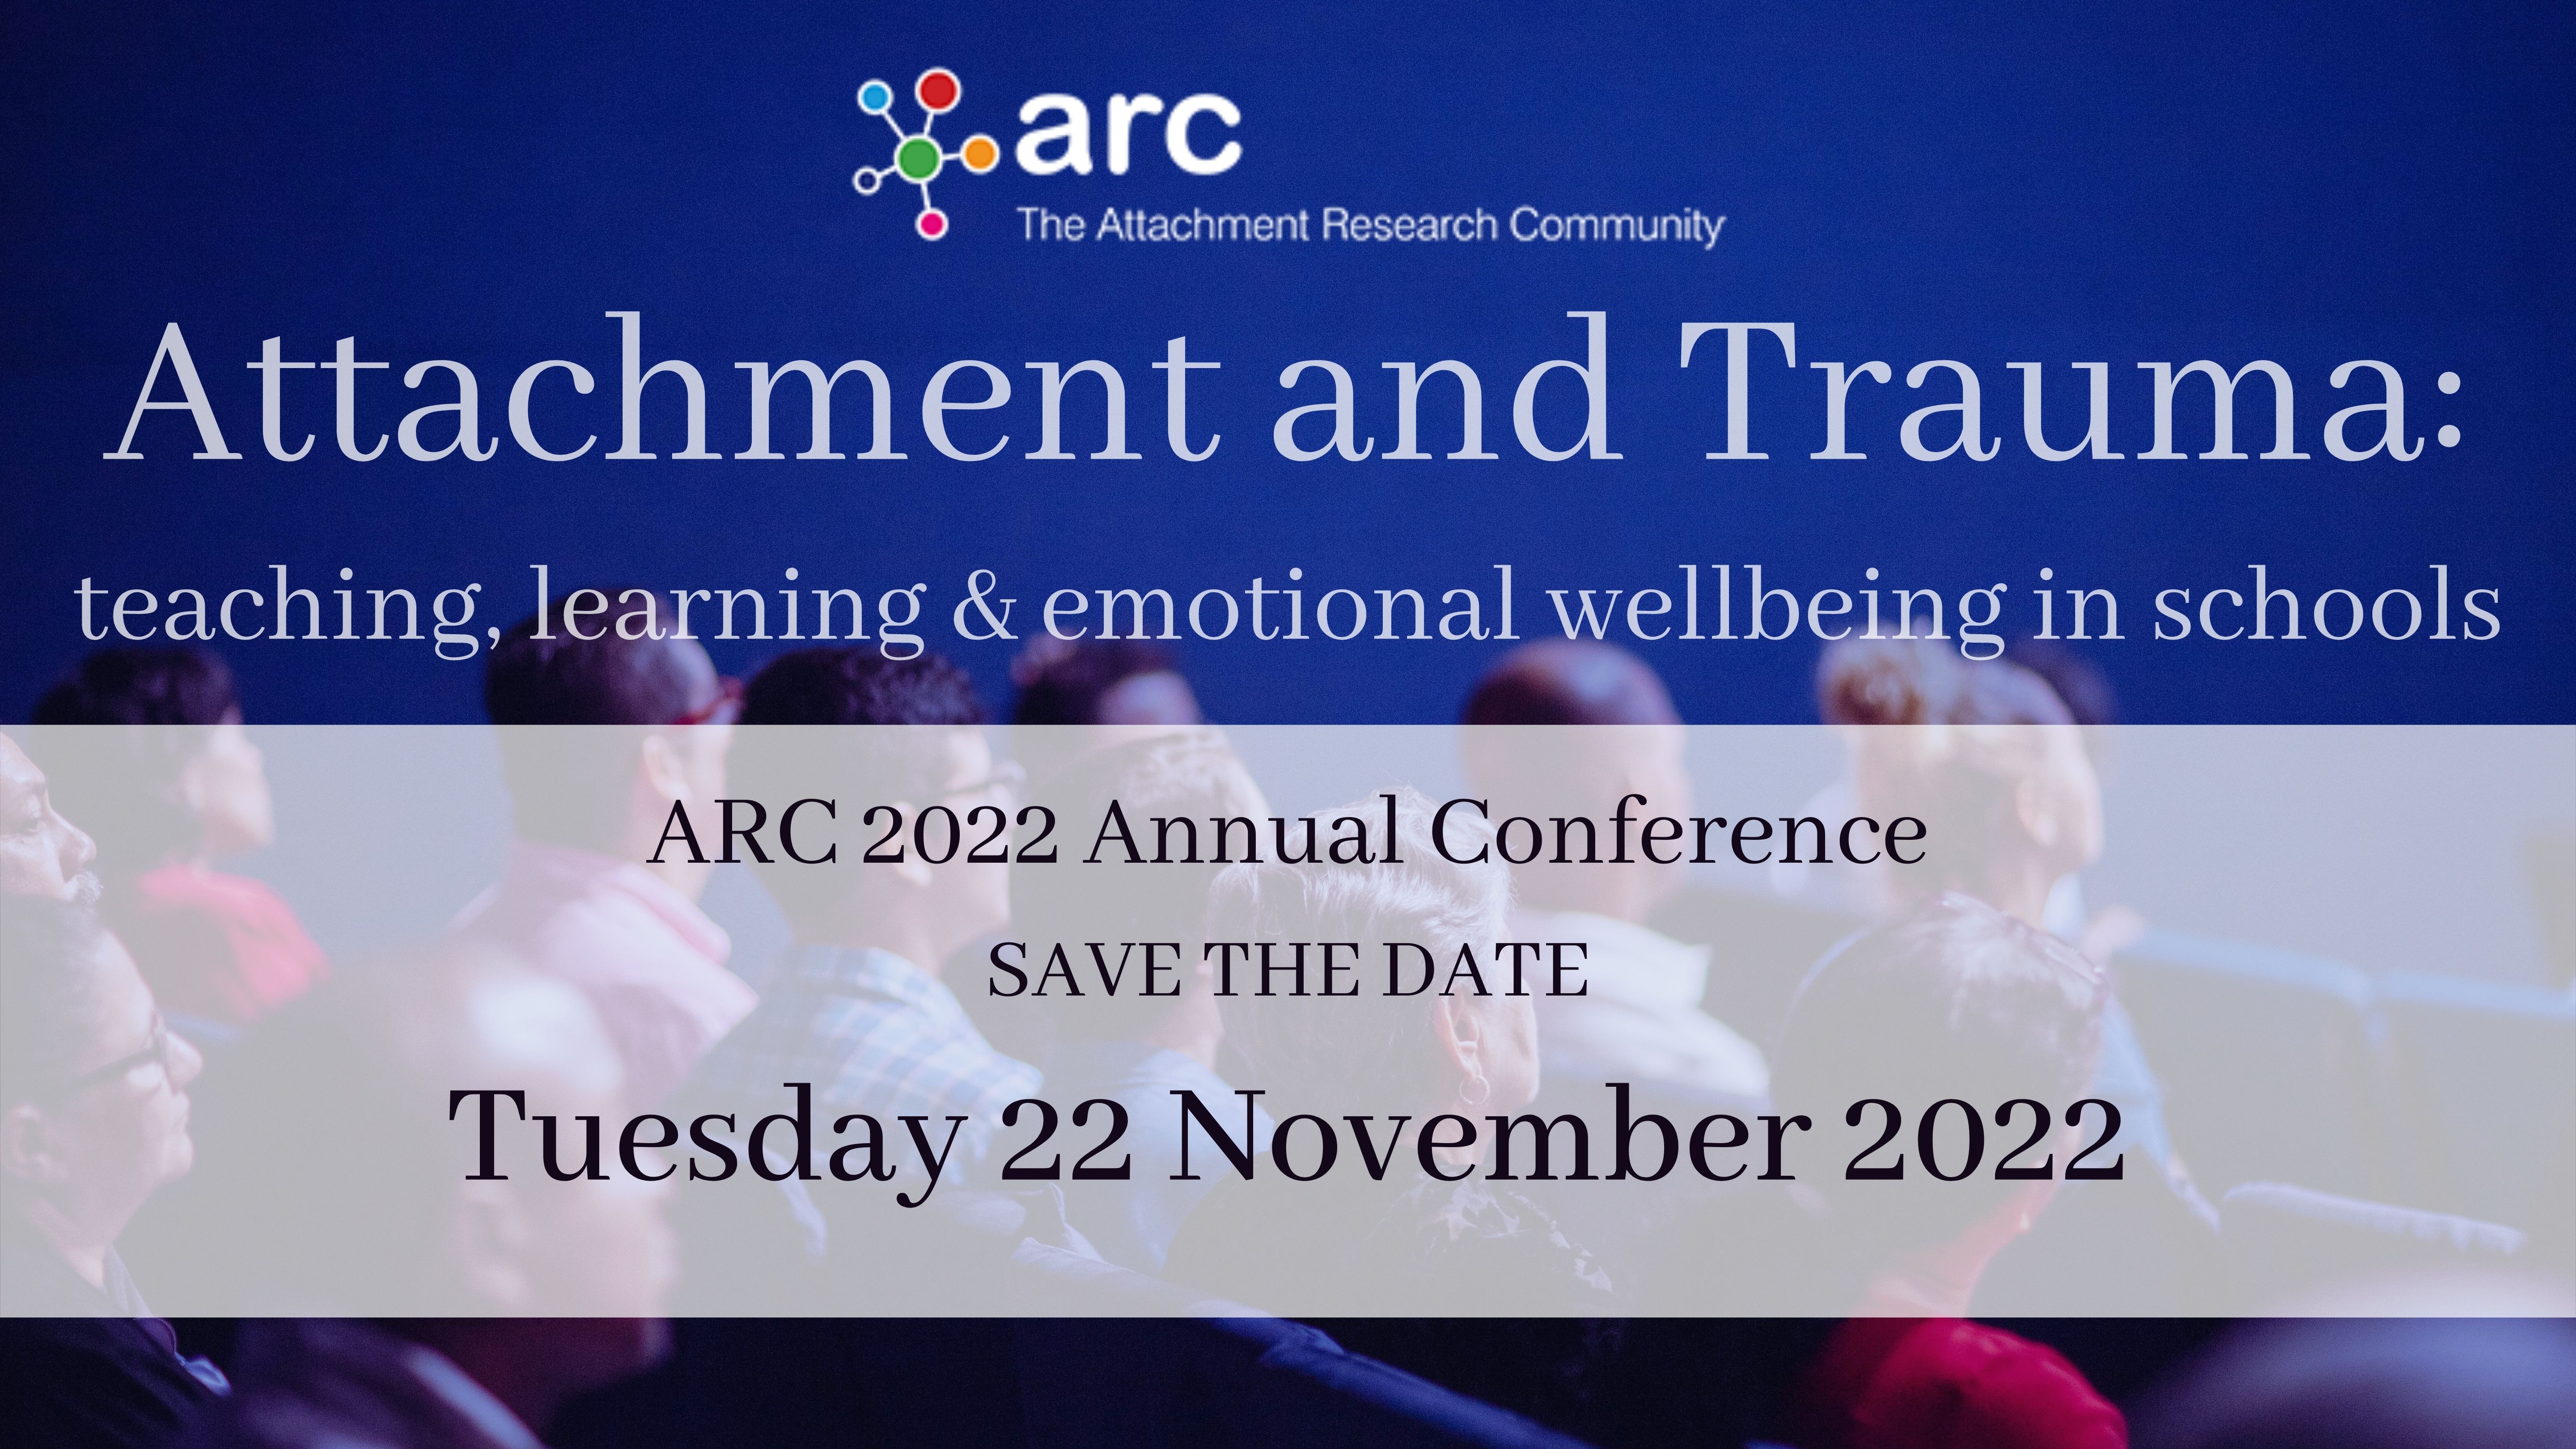 VIRTUAL TICKETS - ARC 2022 Annual Conference 'Attachment and trauma - teaching, learning and emotional wellbeing in school'